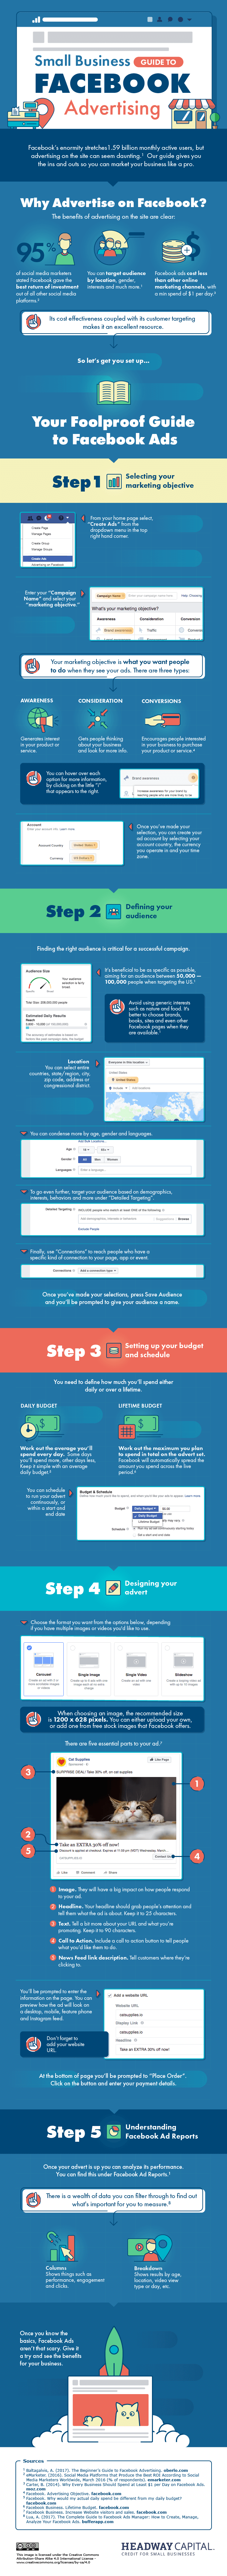 Small Business Guide to Facebook Advertising Infographic